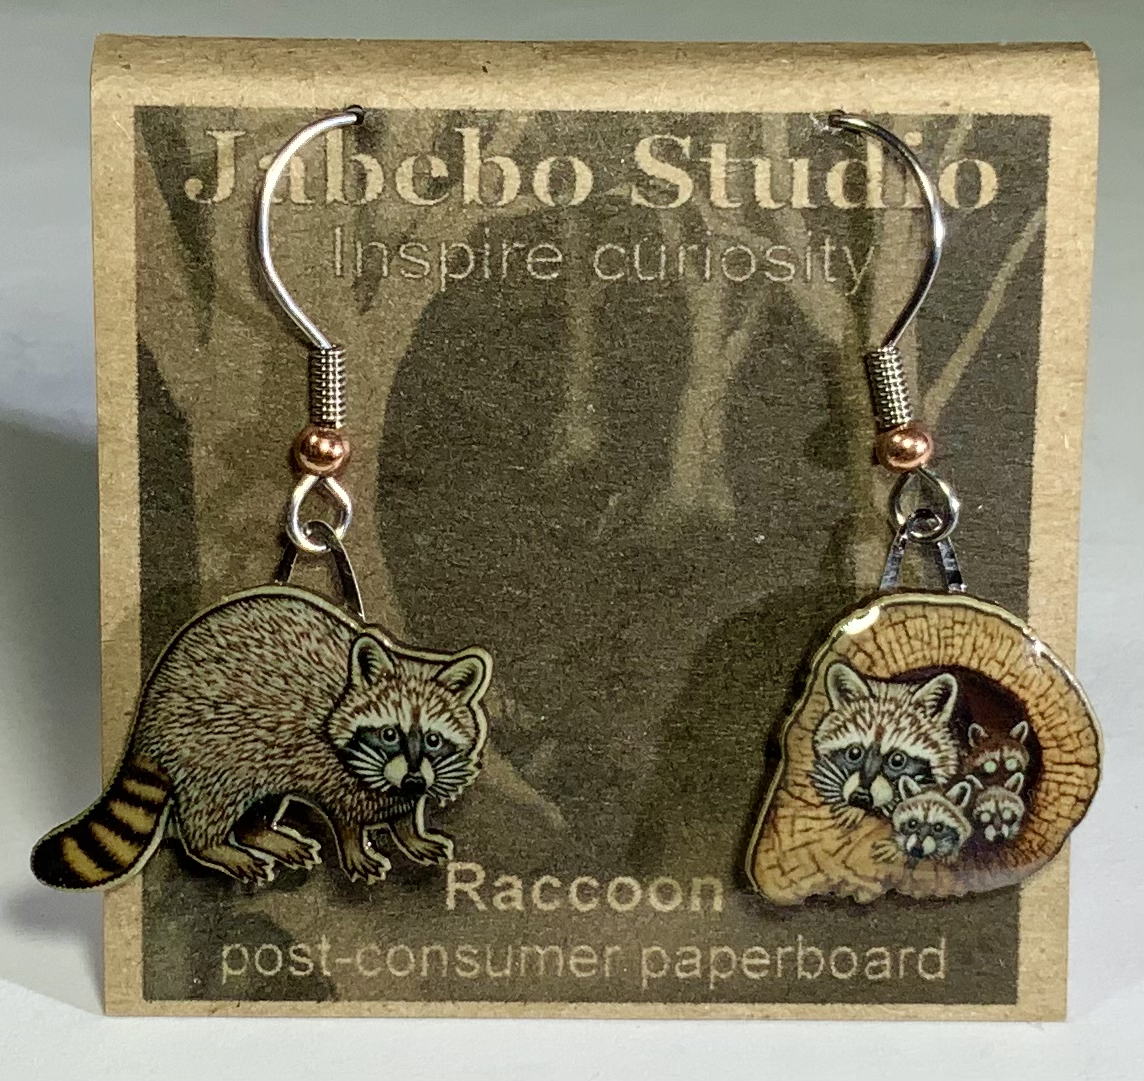 Picture shown is of 1 inch tall pair of earrings of the animal the Raccoon.